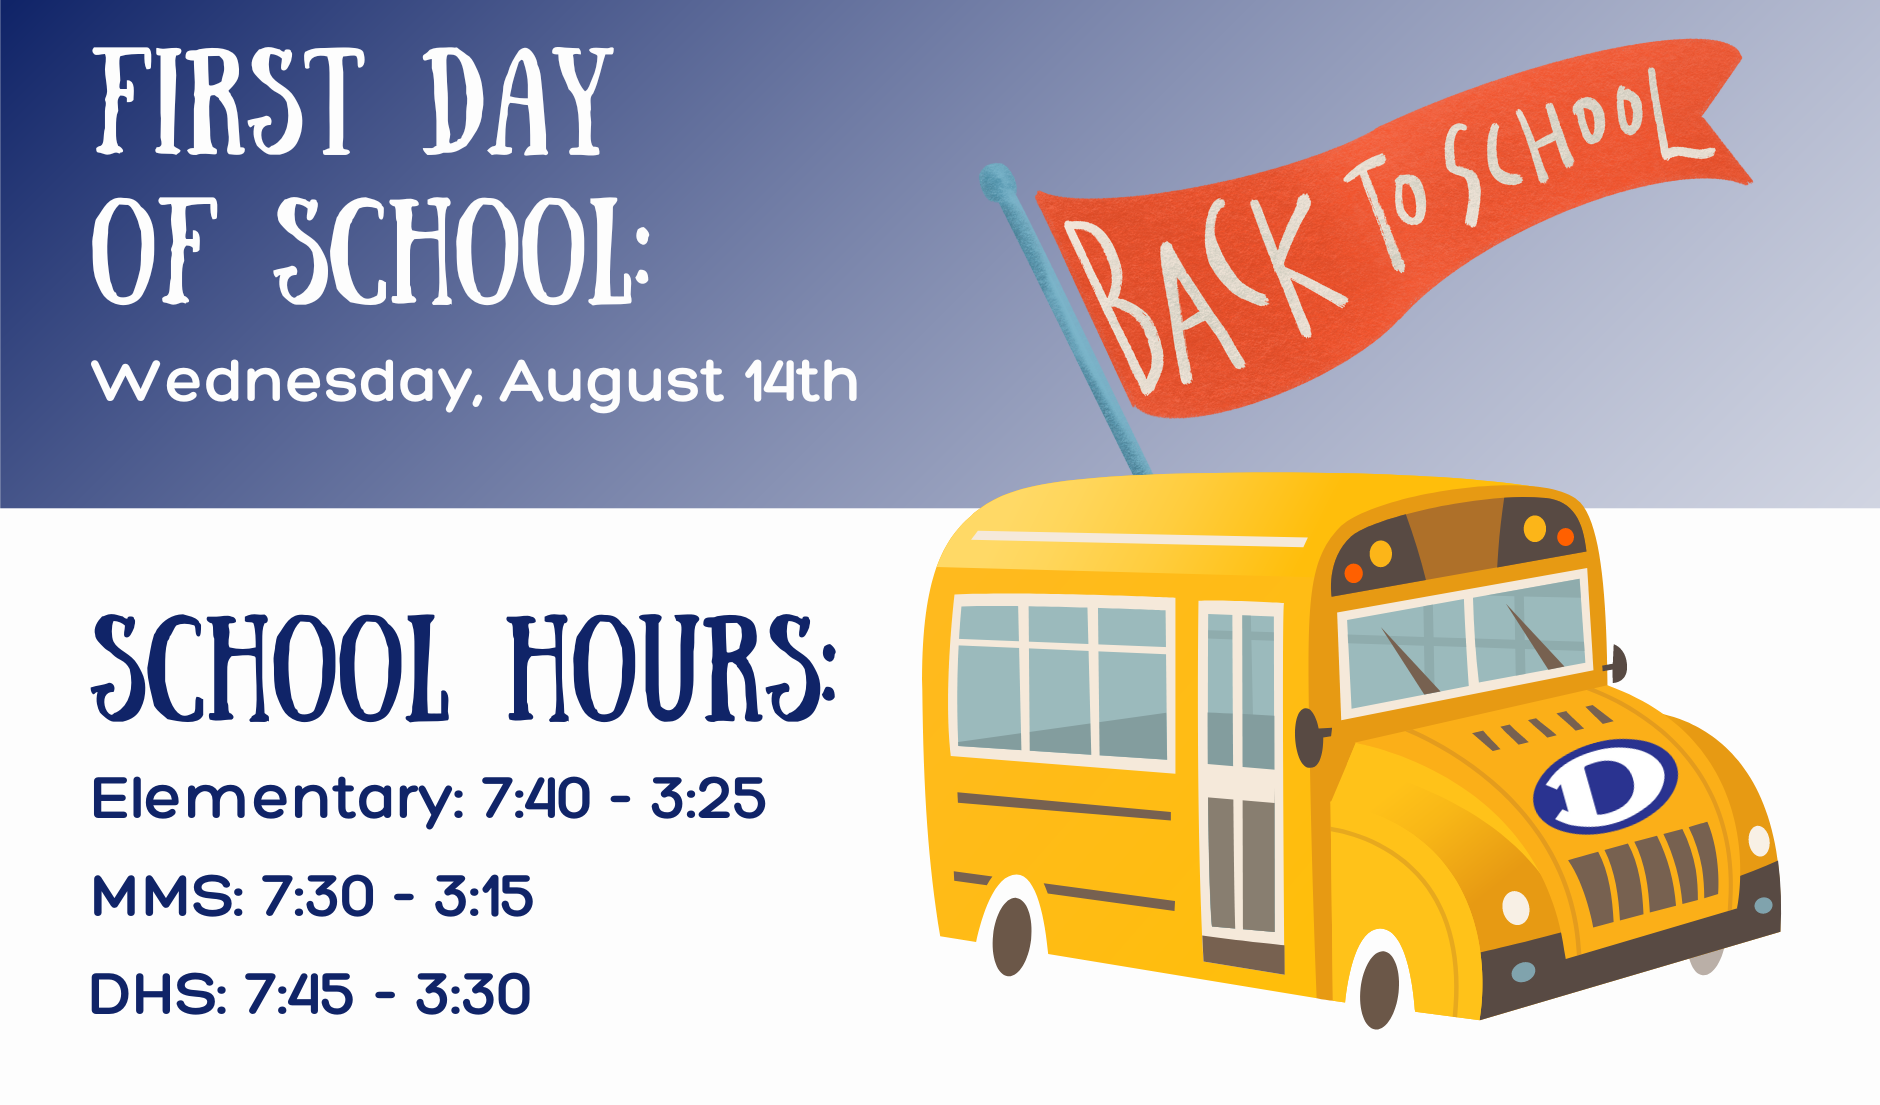 Yellow bus with Back to School flag. First Day of School August 14th. School Hours, Elementary: 7:40 - 3:25, MMS: 7:30 - 3:15, DHS: 7:45 - 3:30